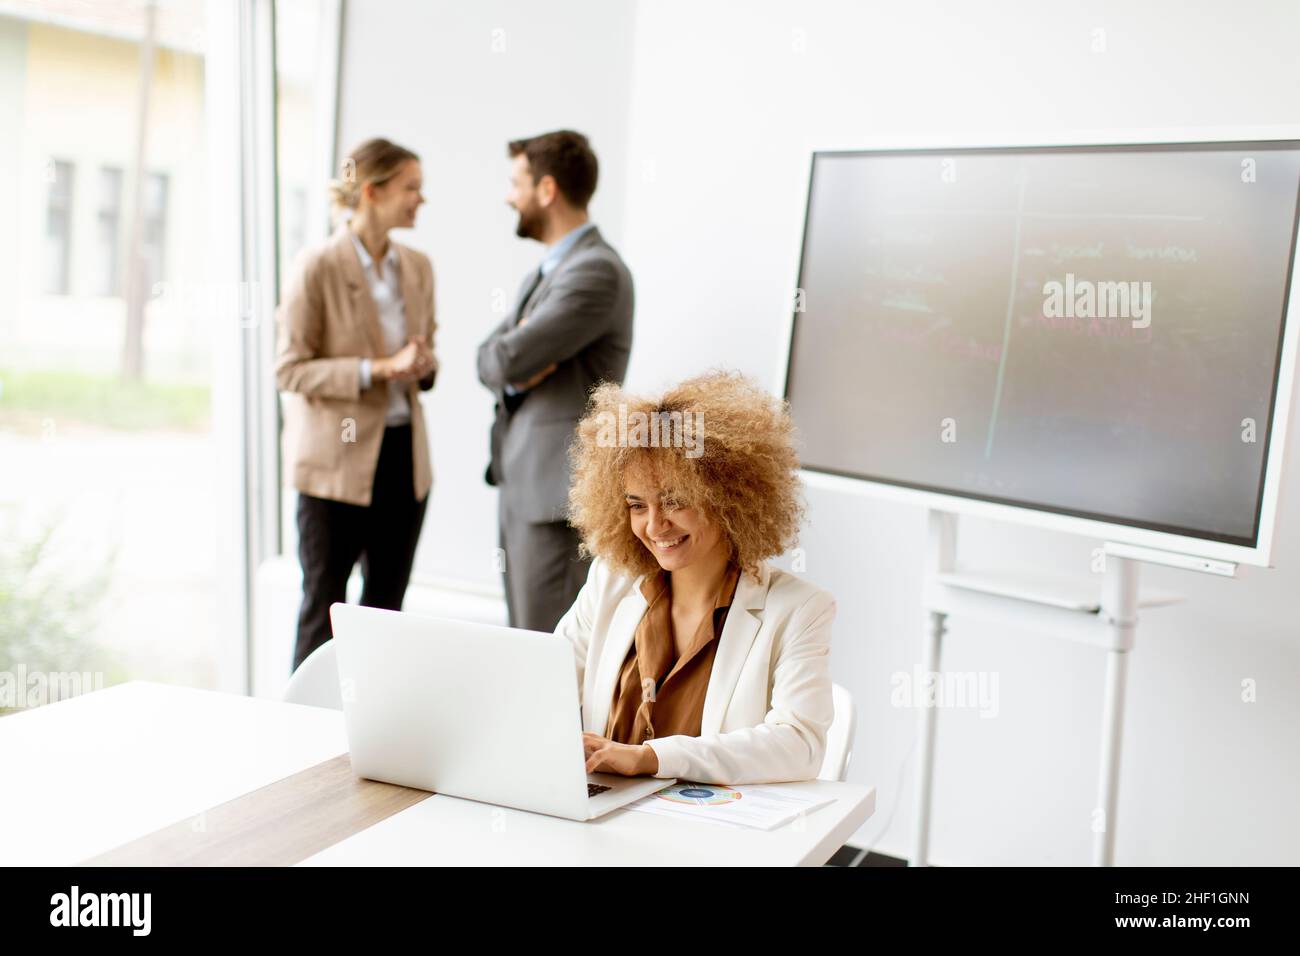 Young curly hair businesswoman using laptop in the office with young people works behind her Stock Photo